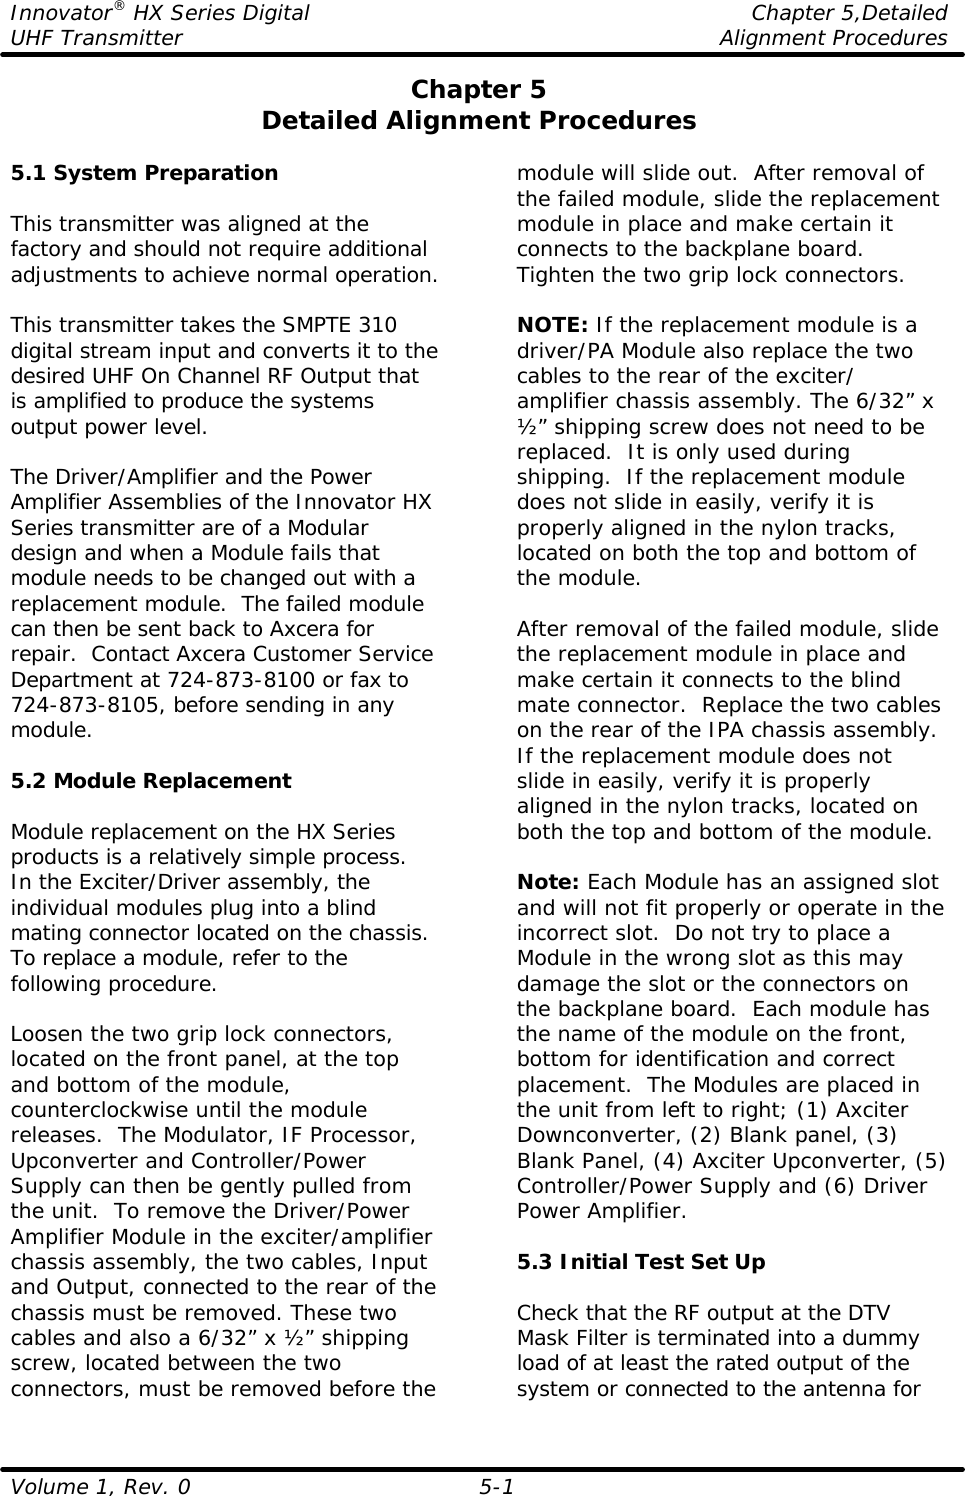 Innovator® HX Series Digital    Chapter 5,Detailed UHF Transmitter    Alignment Procedures  Volume 1, Rev. 0 5-1 Chapter 5 Detailed Alignment Procedures  5.1 System Preparation  This transmitter was aligned at the factory and should not require additional adjustments to achieve normal operation.  This transmitter takes the SMPTE 310 digital stream input and converts it to the desired UHF On Channel RF Output that is amplified to produce the systems output power level.  The Driver/Amplifier and the Power Amplifier Assemblies of the Innovator HX Series transmitter are of a Modular design and when a Module fails that module needs to be changed out with a replacement module.  The failed module can then be sent back to Axcera for repair.  Contact Axcera Customer Service Department at 724-873-8100 or fax to 724-873-8105, before sending in any module.  5.2 Module Replacement  Module replacement on the HX Series products is a relatively simple process.  In the Exciter/Driver assembly, the individual modules plug into a blind mating connector located on the chassis. To replace a module, refer to the following procedure.    Loosen the two grip lock connectors, located on the front panel, at the top and bottom of the module, counterclockwise until the module releases.  The Modulator, IF Processor, Upconverter and Controller/Power Supply can then be gently pulled from the unit.  To remove the Driver/Power Amplifier Module in the exciter/amplifier chassis assembly, the two cables, Input and Output, connected to the rear of the chassis must be removed. These two cables and also a 6/32” x ½” shipping screw, located between the two connectors, must be removed before the module will slide out.  After removal of the failed module, slide the replacement module in place and make certain it connects to the backplane board.  Tighten the two grip lock connectors.  NOTE: If the replacement module is a driver/PA Module also replace the two cables to the rear of the exciter/ amplifier chassis assembly. The 6/32” x ½” shipping screw does not need to be replaced.  It is only used during shipping.  If the replacement module does not slide in easily, verify it is properly aligned in the nylon tracks, located on both the top and bottom of the module.  After removal of the failed module, slide the replacement module in place and make certain it connects to the blind mate connector.  Replace the two cables on the rear of the IPA chassis assembly.  If the replacement module does not slide in easily, verify it is properly aligned in the nylon tracks, located on both the top and bottom of the module.  Note: Each Module has an assigned slot and will not fit properly or operate in the incorrect slot.  Do not try to place a Module in the wrong slot as this may damage the slot or the connectors on the backplane board.  Each module has the name of the module on the front, bottom for identification and correct placement.  The Modules are placed in the unit from left to right; (1) Axciter Downconverter, (2) Blank panel, (3) Blank Panel, (4) Axciter Upconverter, (5) Controller/Power Supply and (6) Driver Power Amplifier.  5.3 Initial Test Set Up  Check that the RF output at the DTV Mask Filter is terminated into a dummy load of at least the rated output of the system or connected to the antenna for 